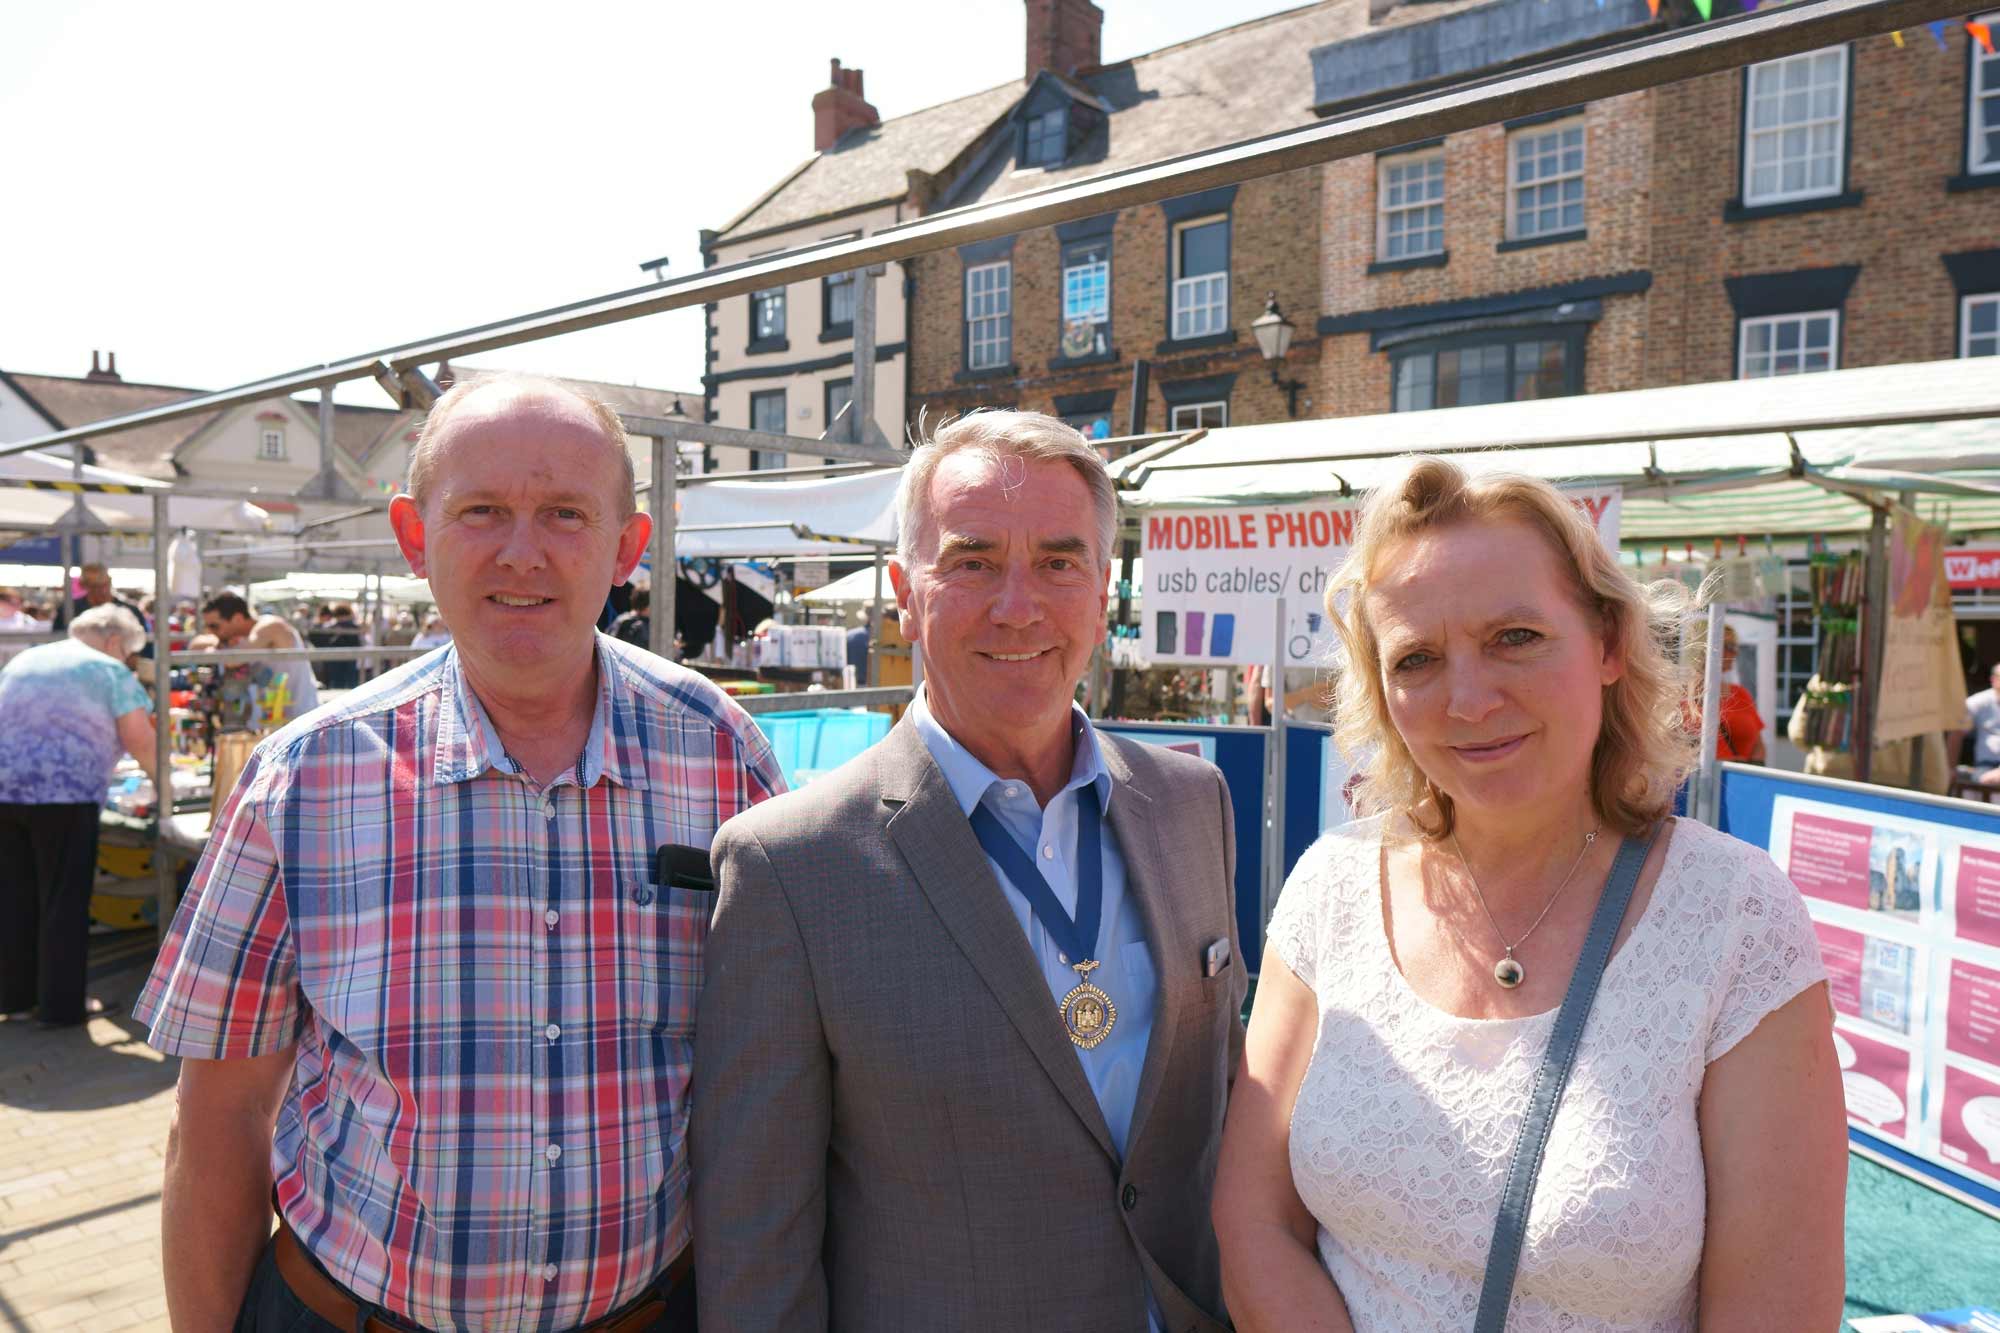 Cllr Andrew Willoughby, Cllr Phil Ireland and Kathy Allday